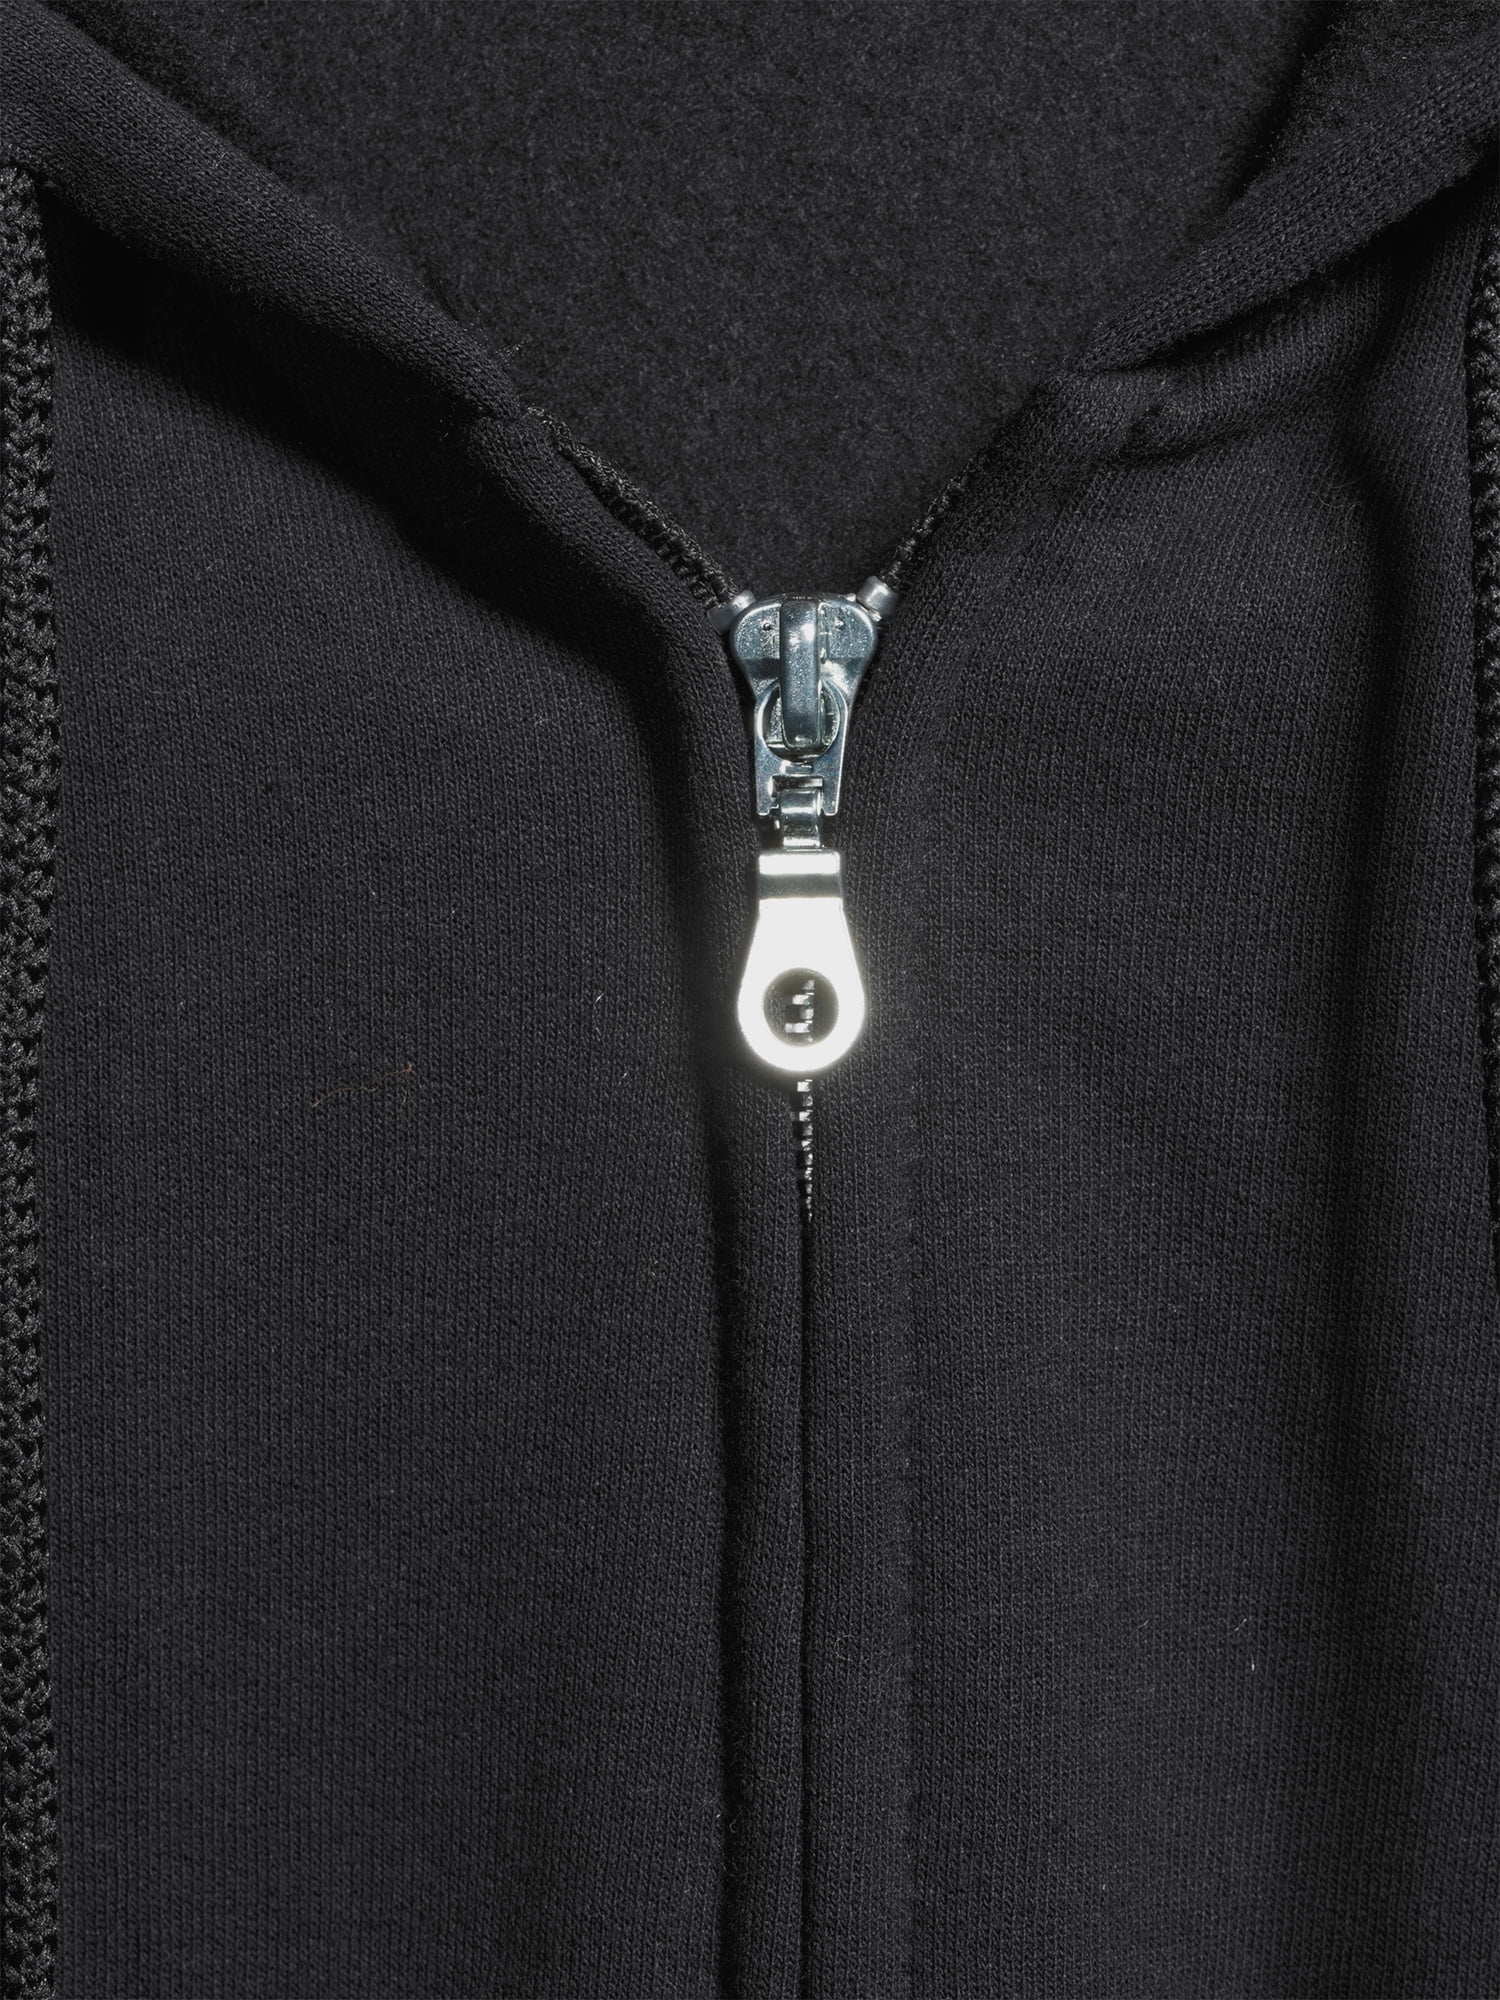 Gildan Heavy Blend Full Zip Hoodie - Small to 3XL in Zambia at ZMW 795 ...